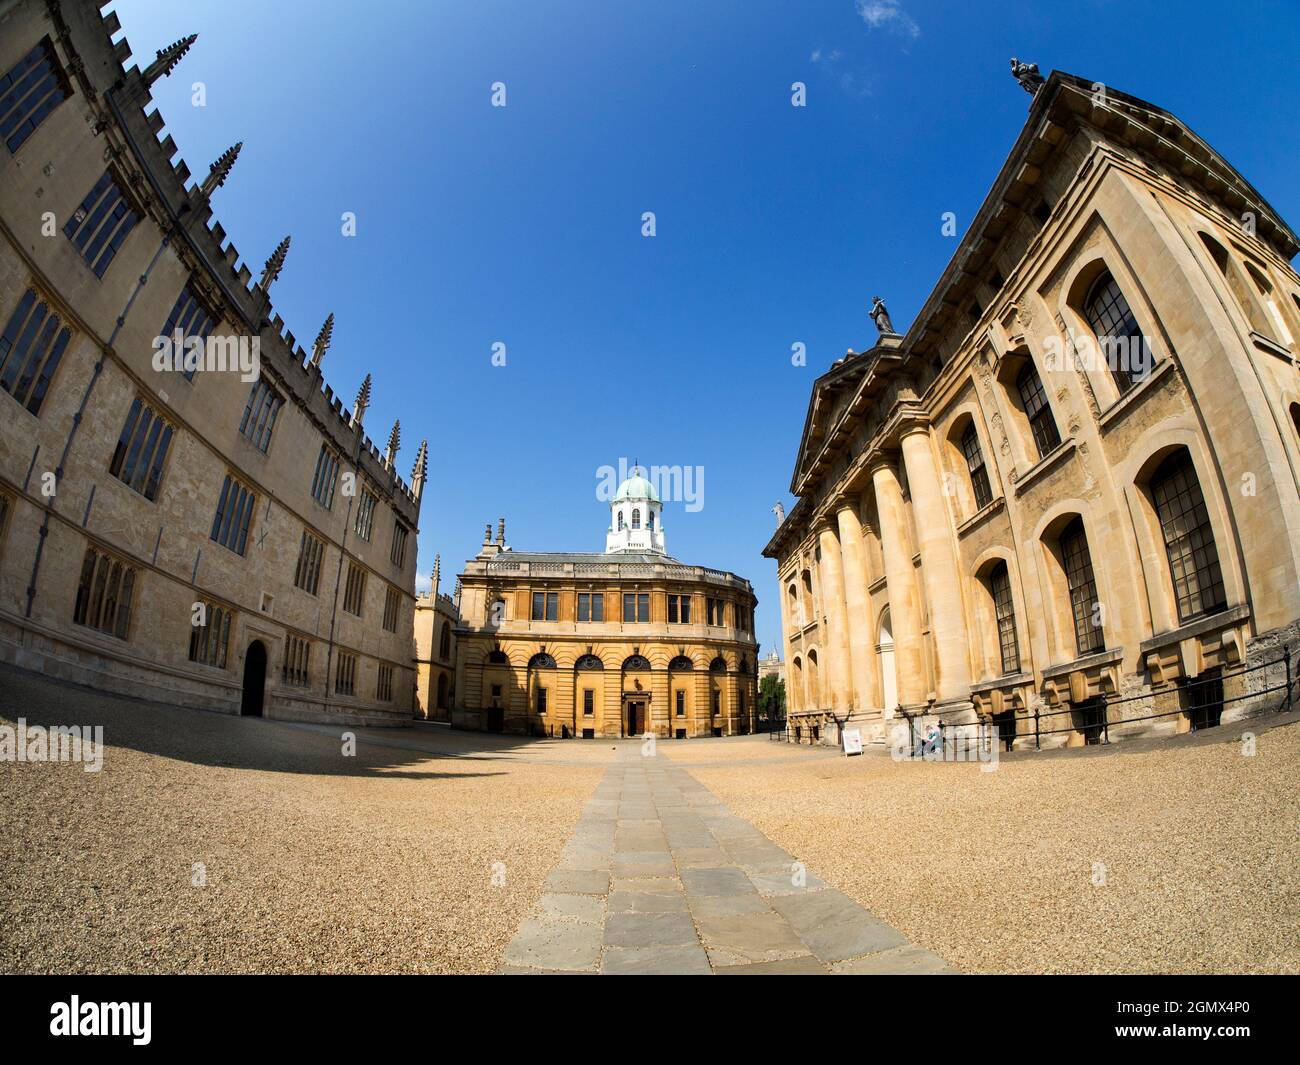 Oxford, England - 8 May 2013;  Three famous classical buildings in the heart of Oxford-  the Sheldonian Theatre, Bodleian Library and Clarendon Buildi Stock Photo